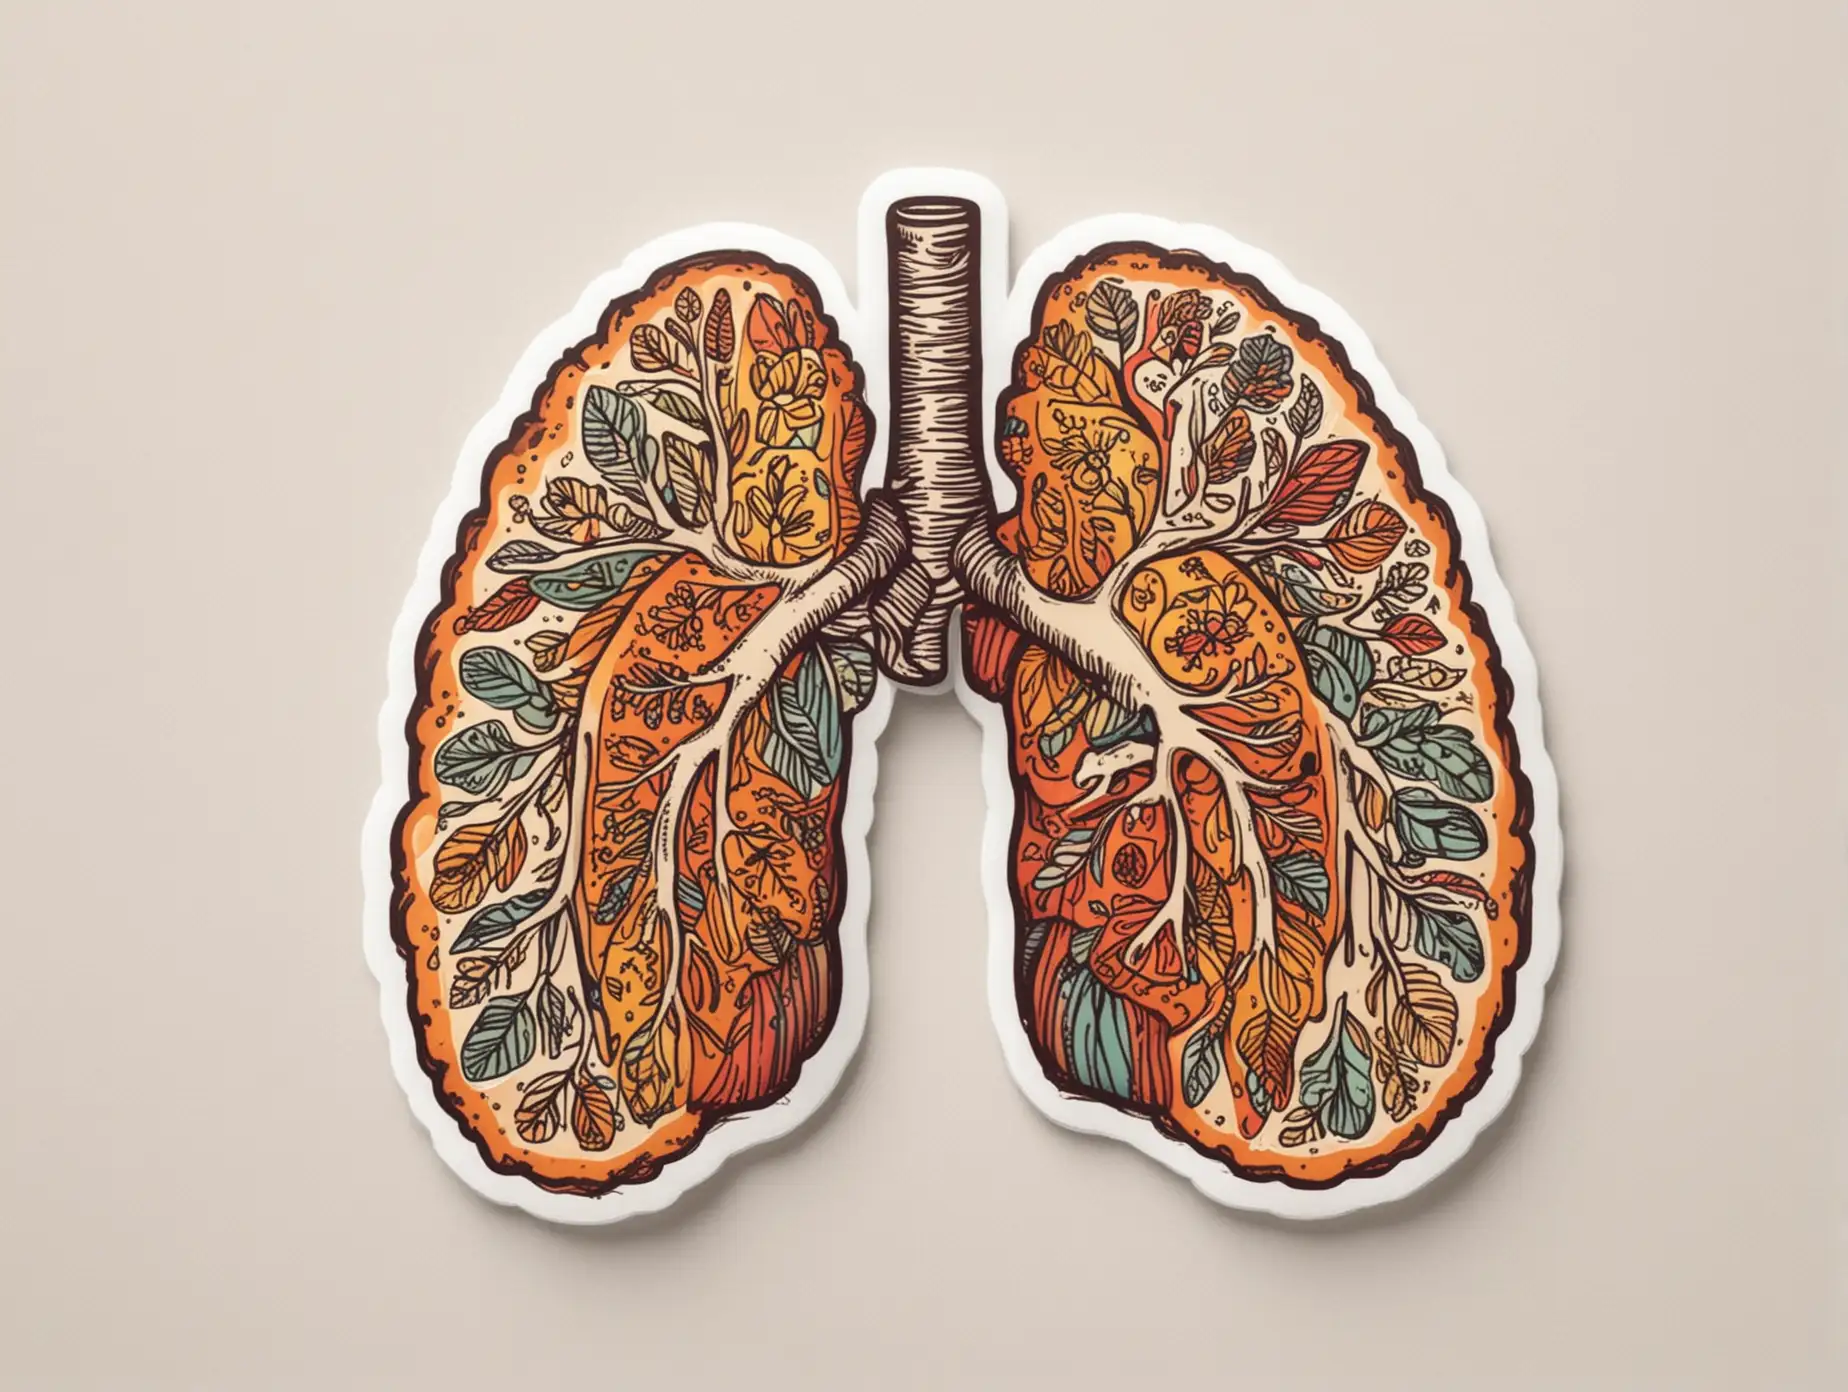 /imagine prompt: Lungs Sticker, Sticker, Cheerful, Warm Colors, outsider art style, Contour, Vector, White Background, Detailed
